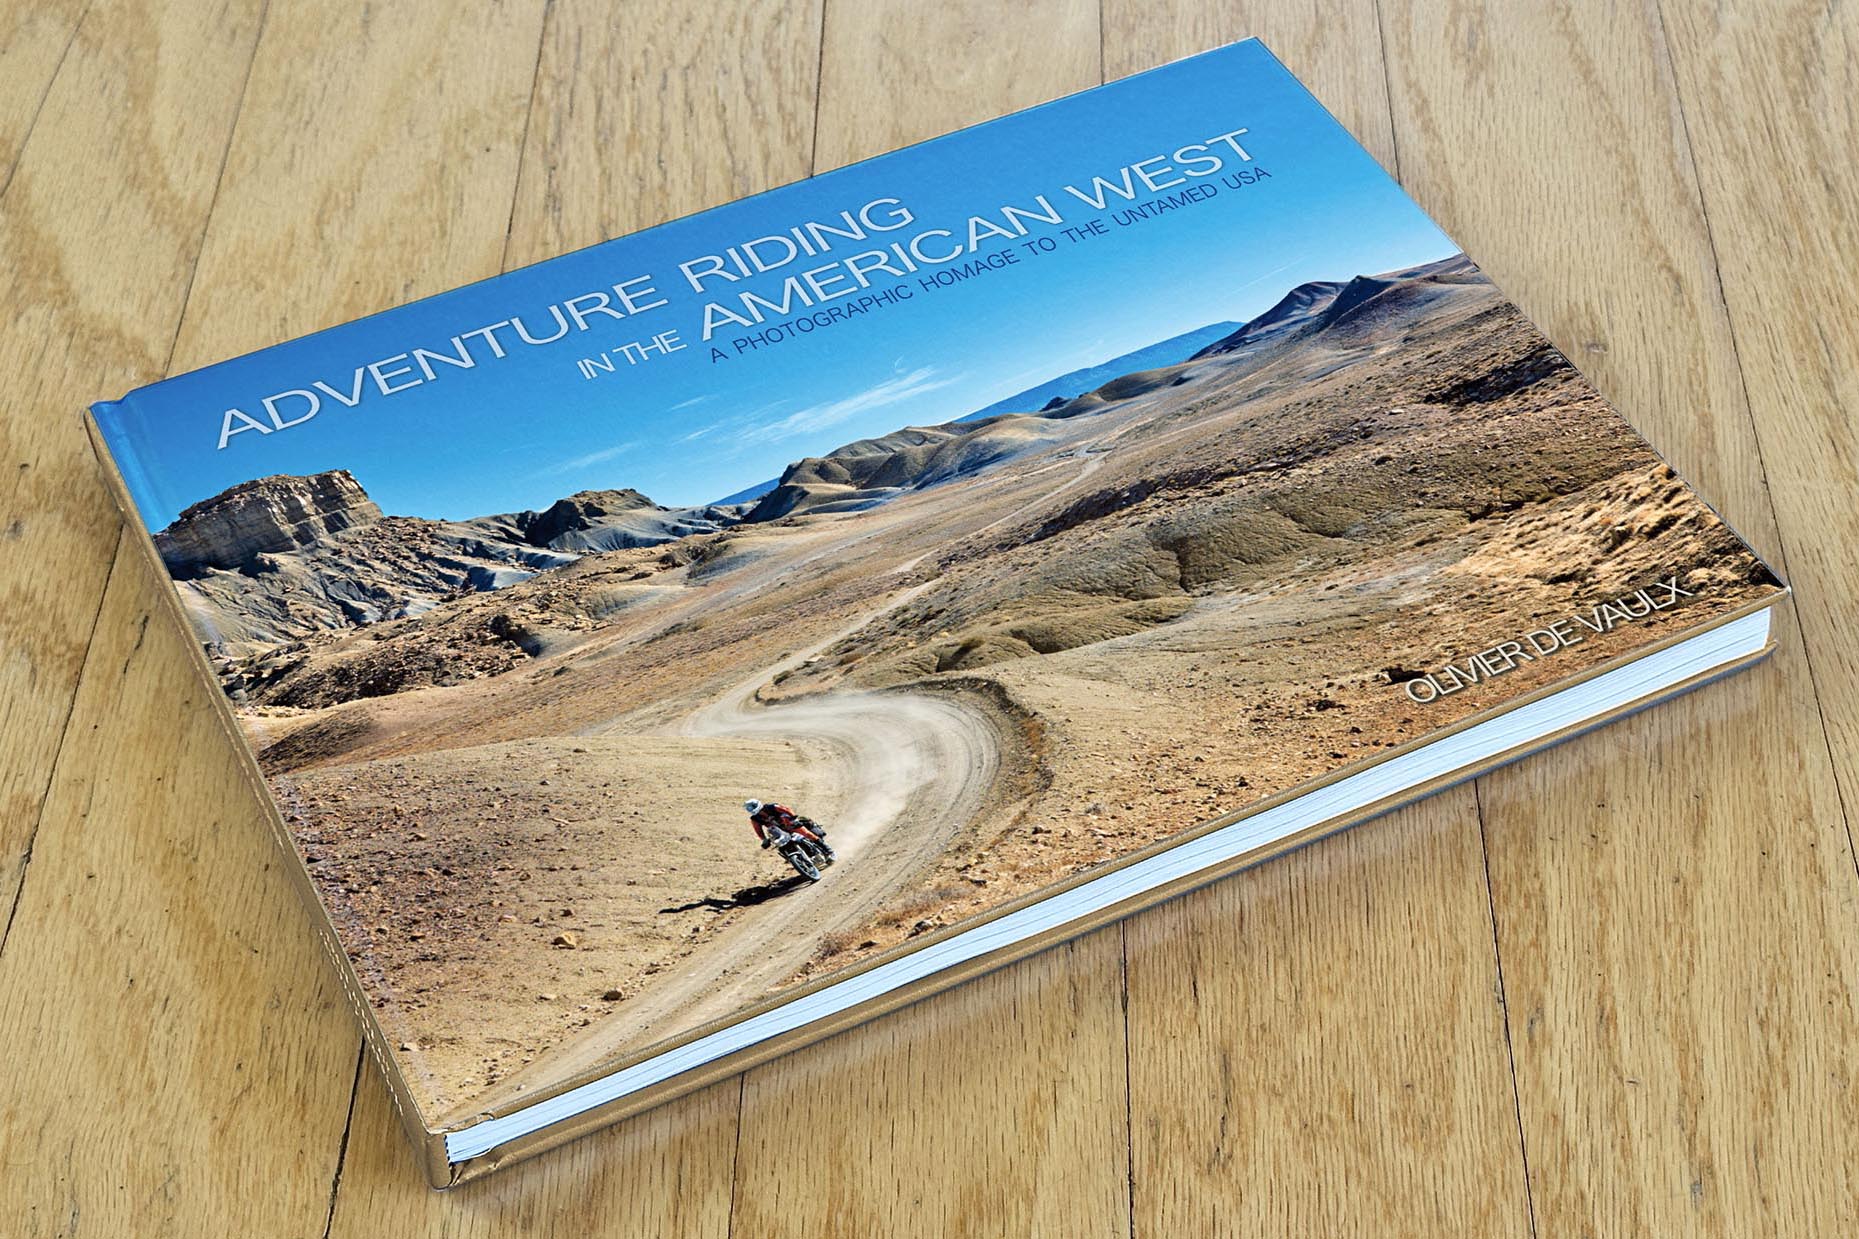 New Photobook “Adventure Riding in the American West” is live on Kickstarter